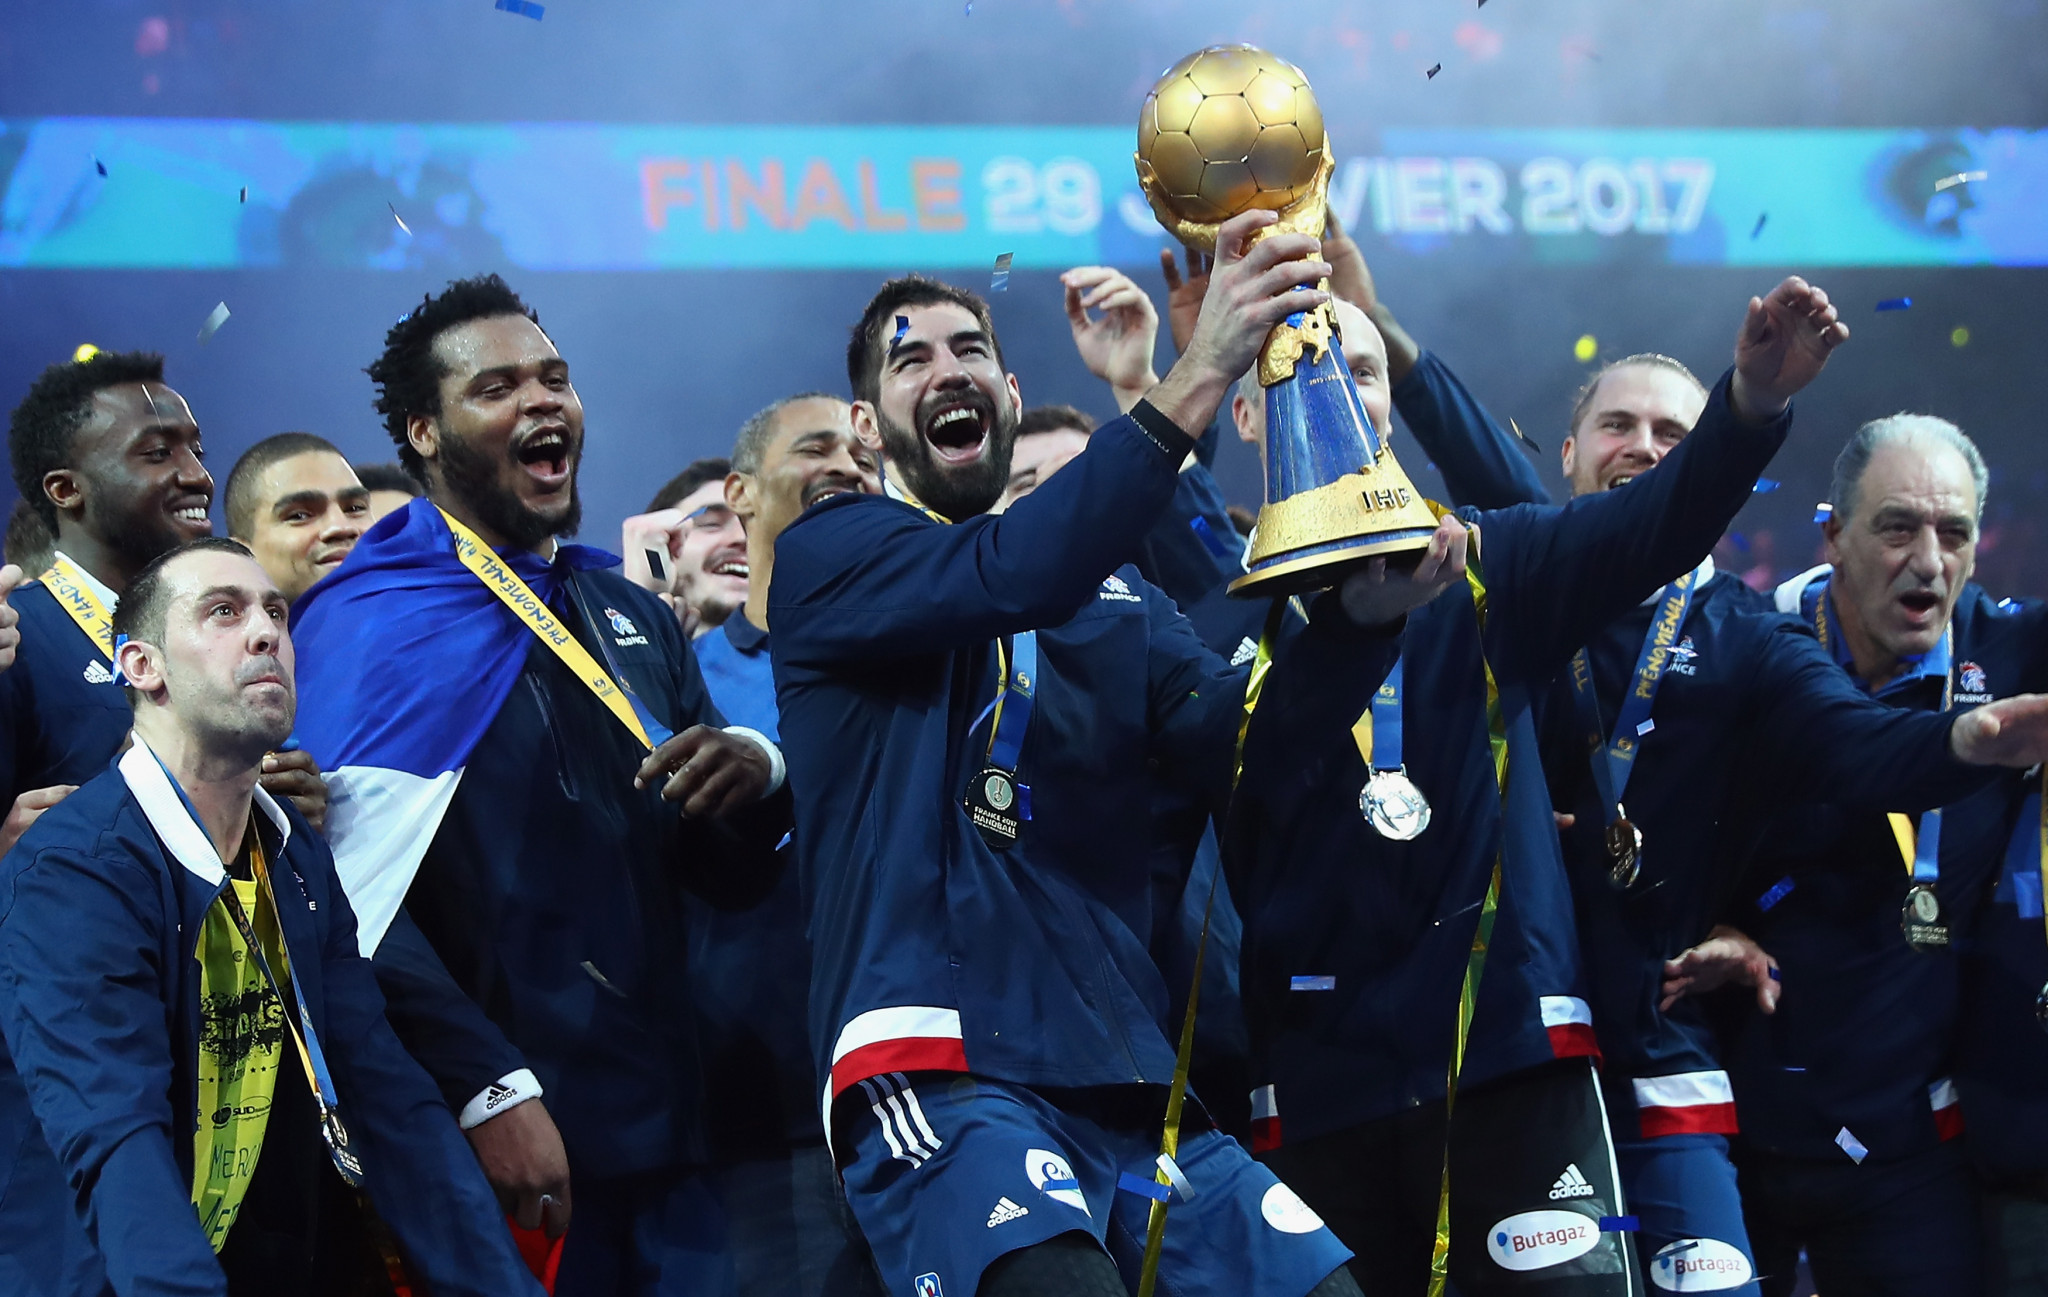 The 2019 Men's Handball World Championships will start tomorrow with France looking to defend their title ©Getty Images